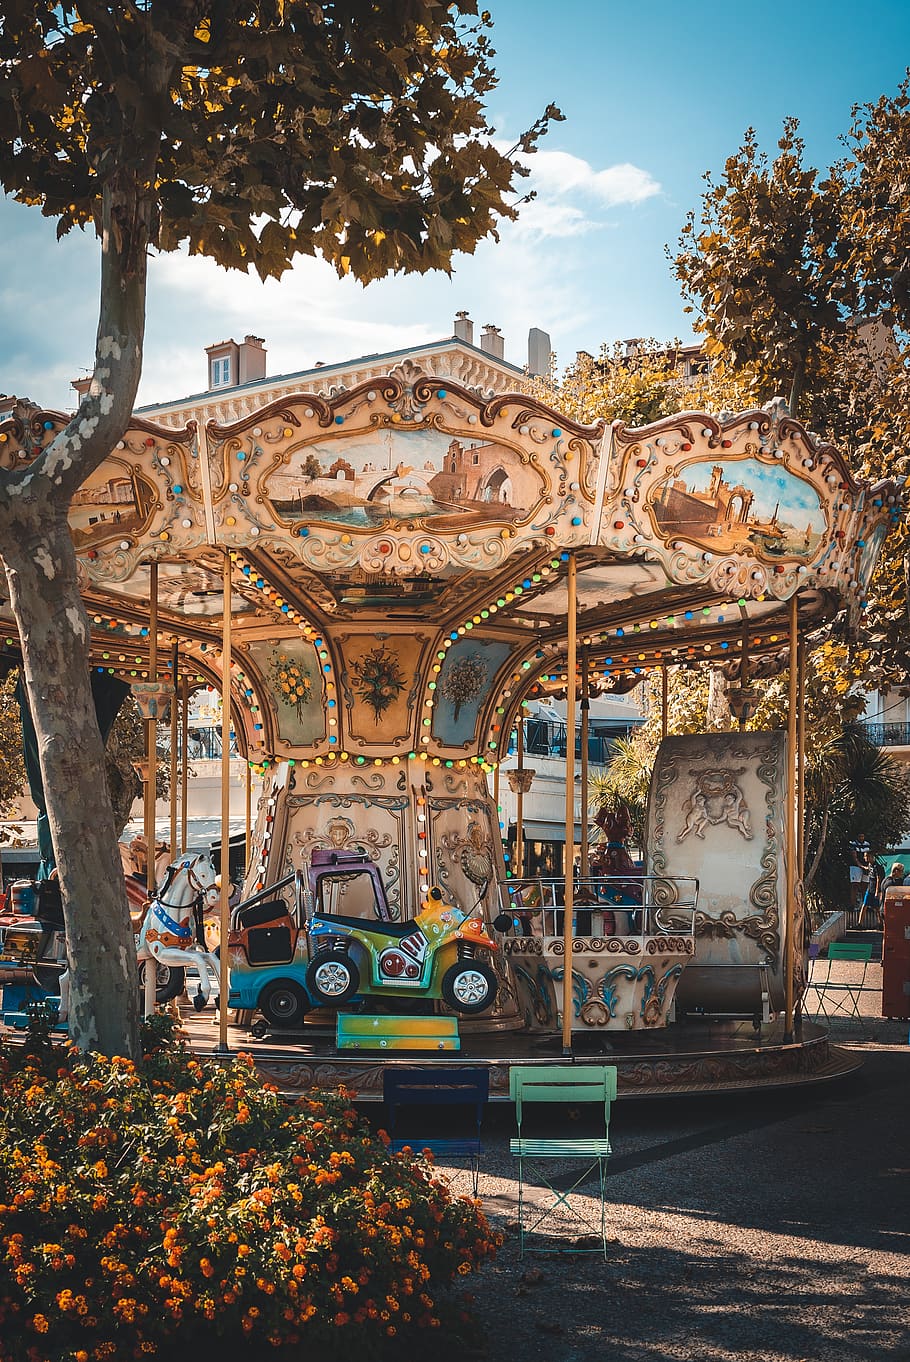 multicolored carousel near brown leaf trees at daytime, amusement park